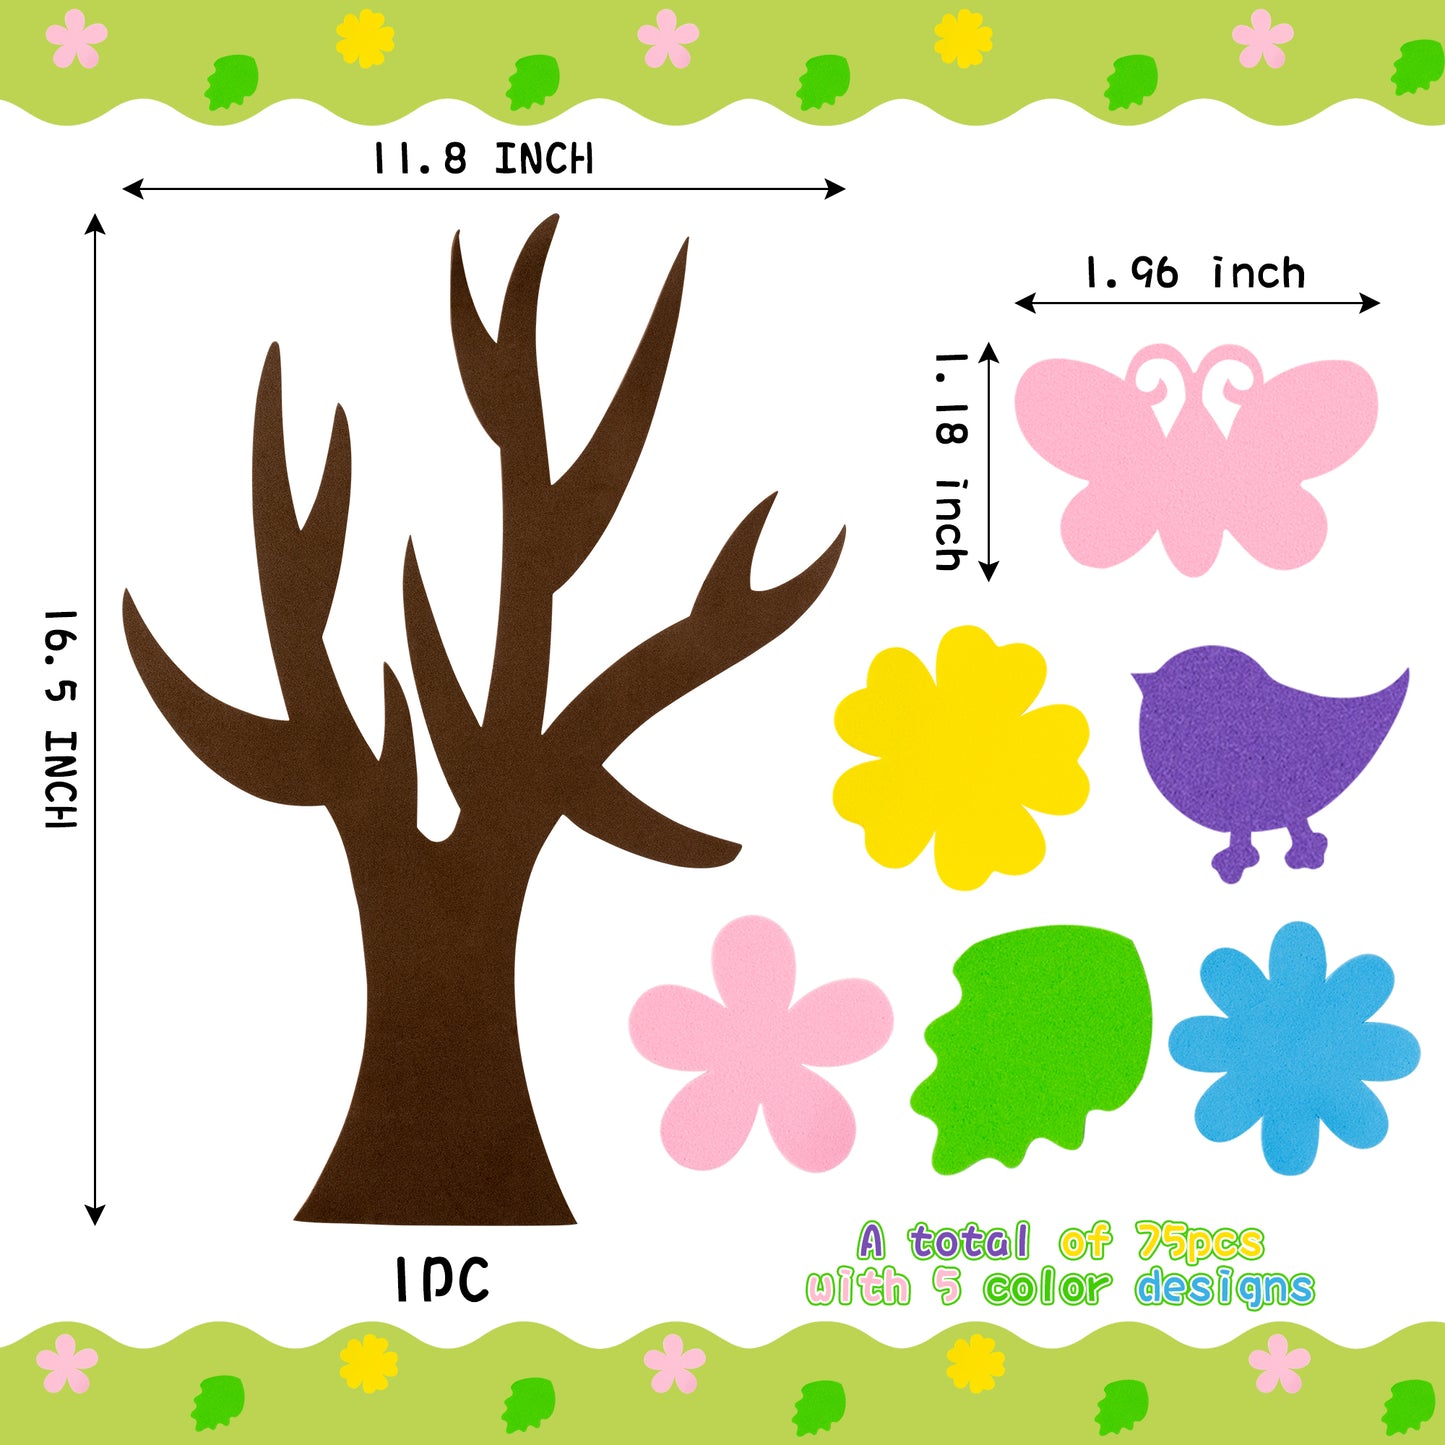 HubirdSall 76Pcs Spring Tree Craft Kit for kids DIY Foam Springtime Bulletin Board Set with Flower Leaf Butterfly Bird Stickers Self Adhesive, Art Project Family Classroom Activity Home Decoration